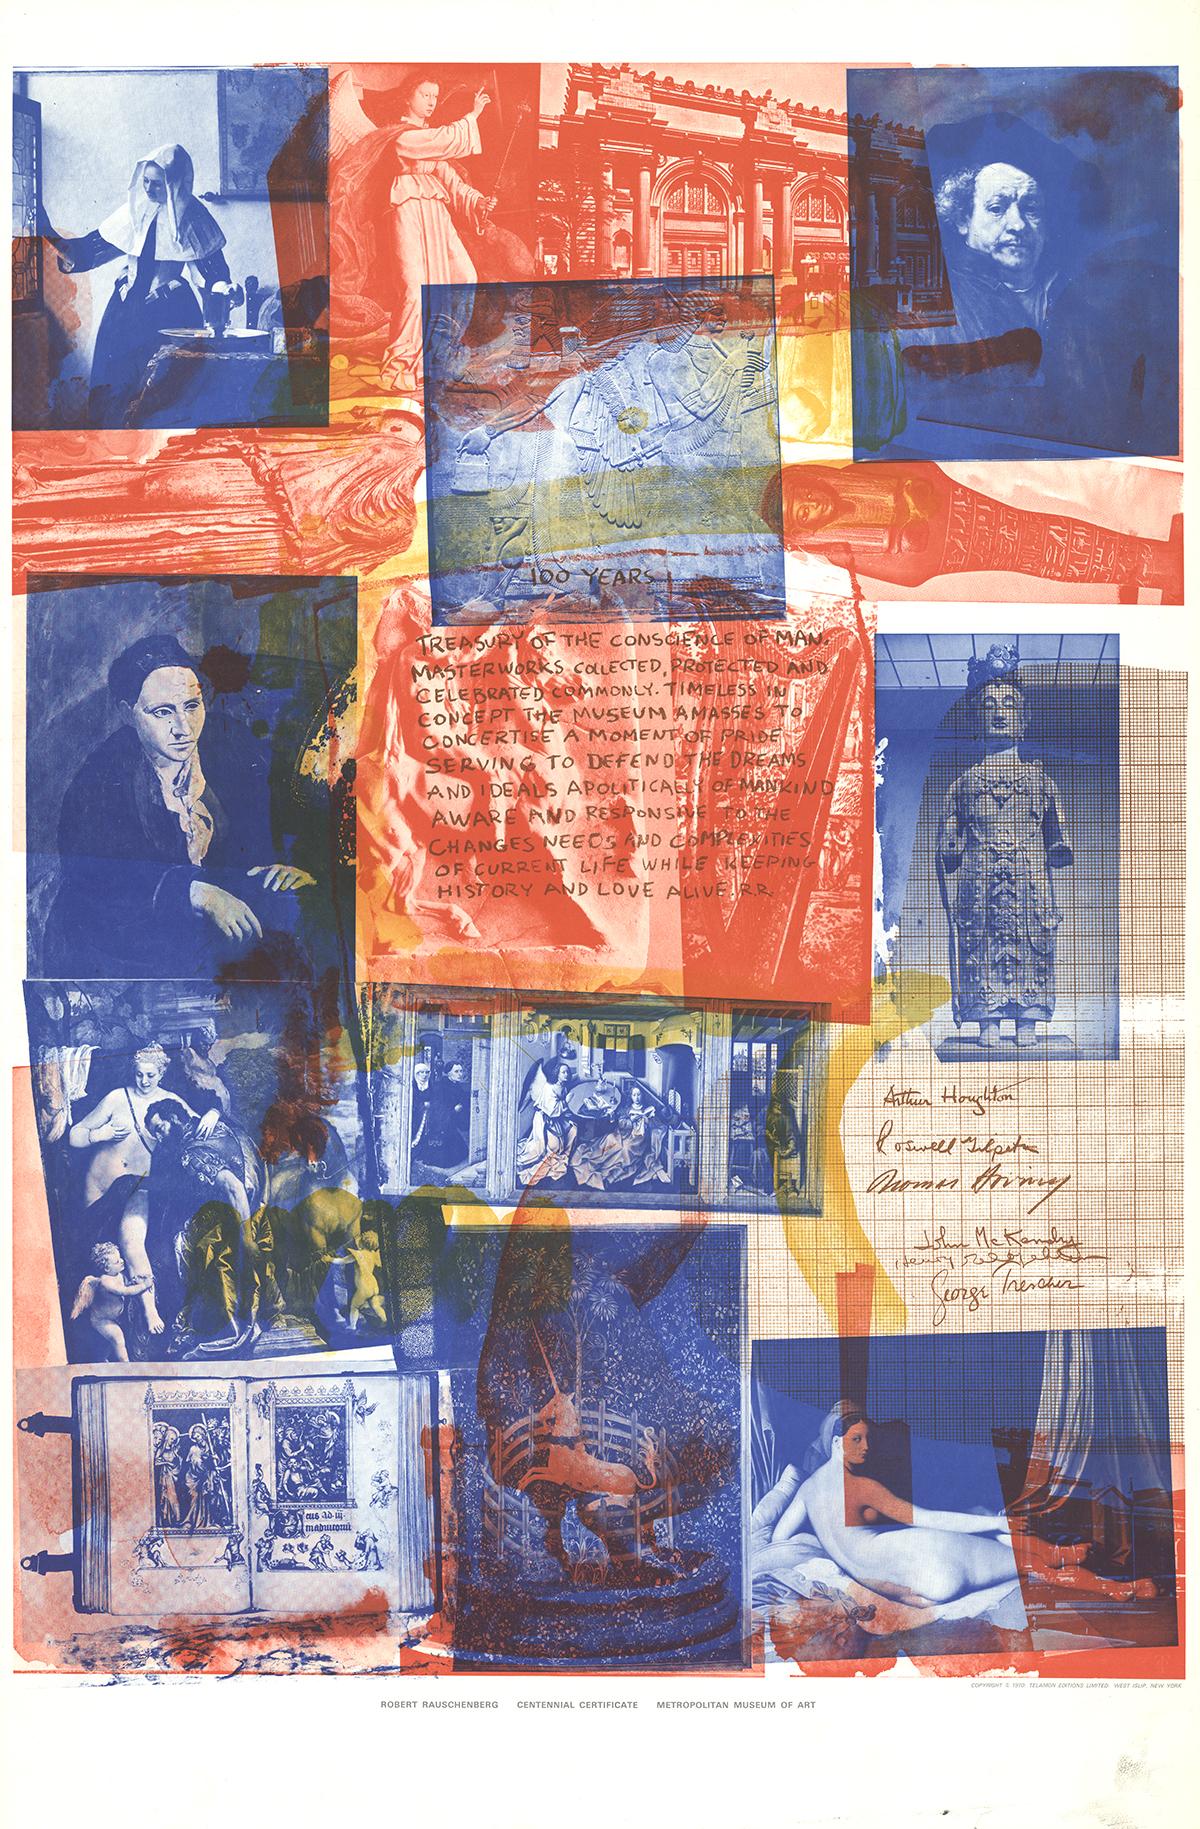 Sku: MI1218
Artist: Robert Rauschenberg
Title: Centennial Certificate
Year: 1970
Signed: No
Medium: Offset Lithograph
Paper Size: 39 x 25.5 inches ( 99.06 x 64.77 cm )
Image Size: 34 x 24.25 inches ( 86.36 x 61.595 cm )
Edition Size: 1000
Framed: